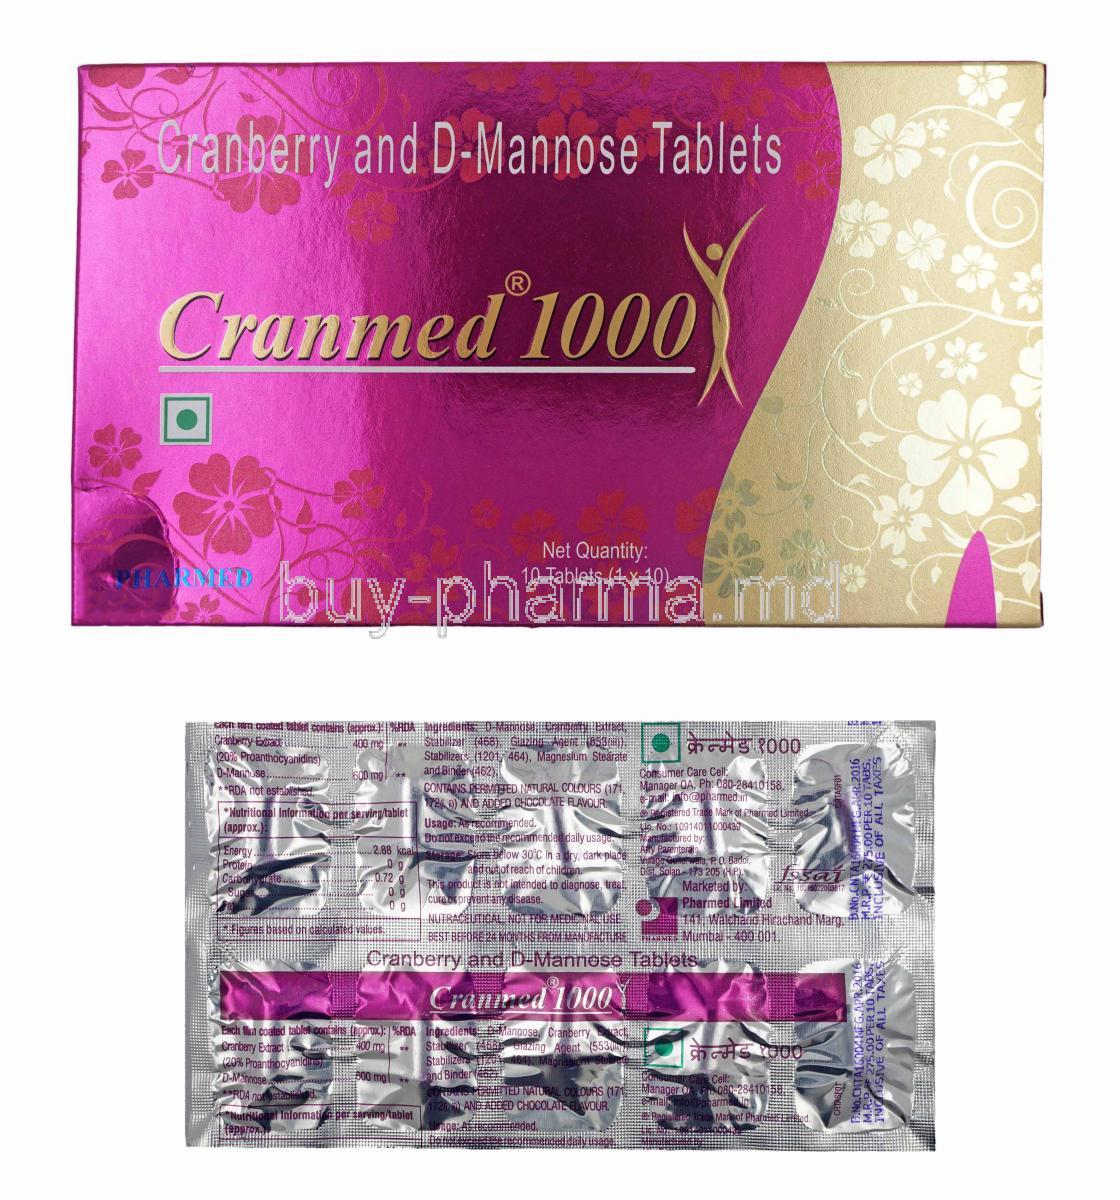 Cranmed, Cranberry Extract and D-Mannose box and tablets